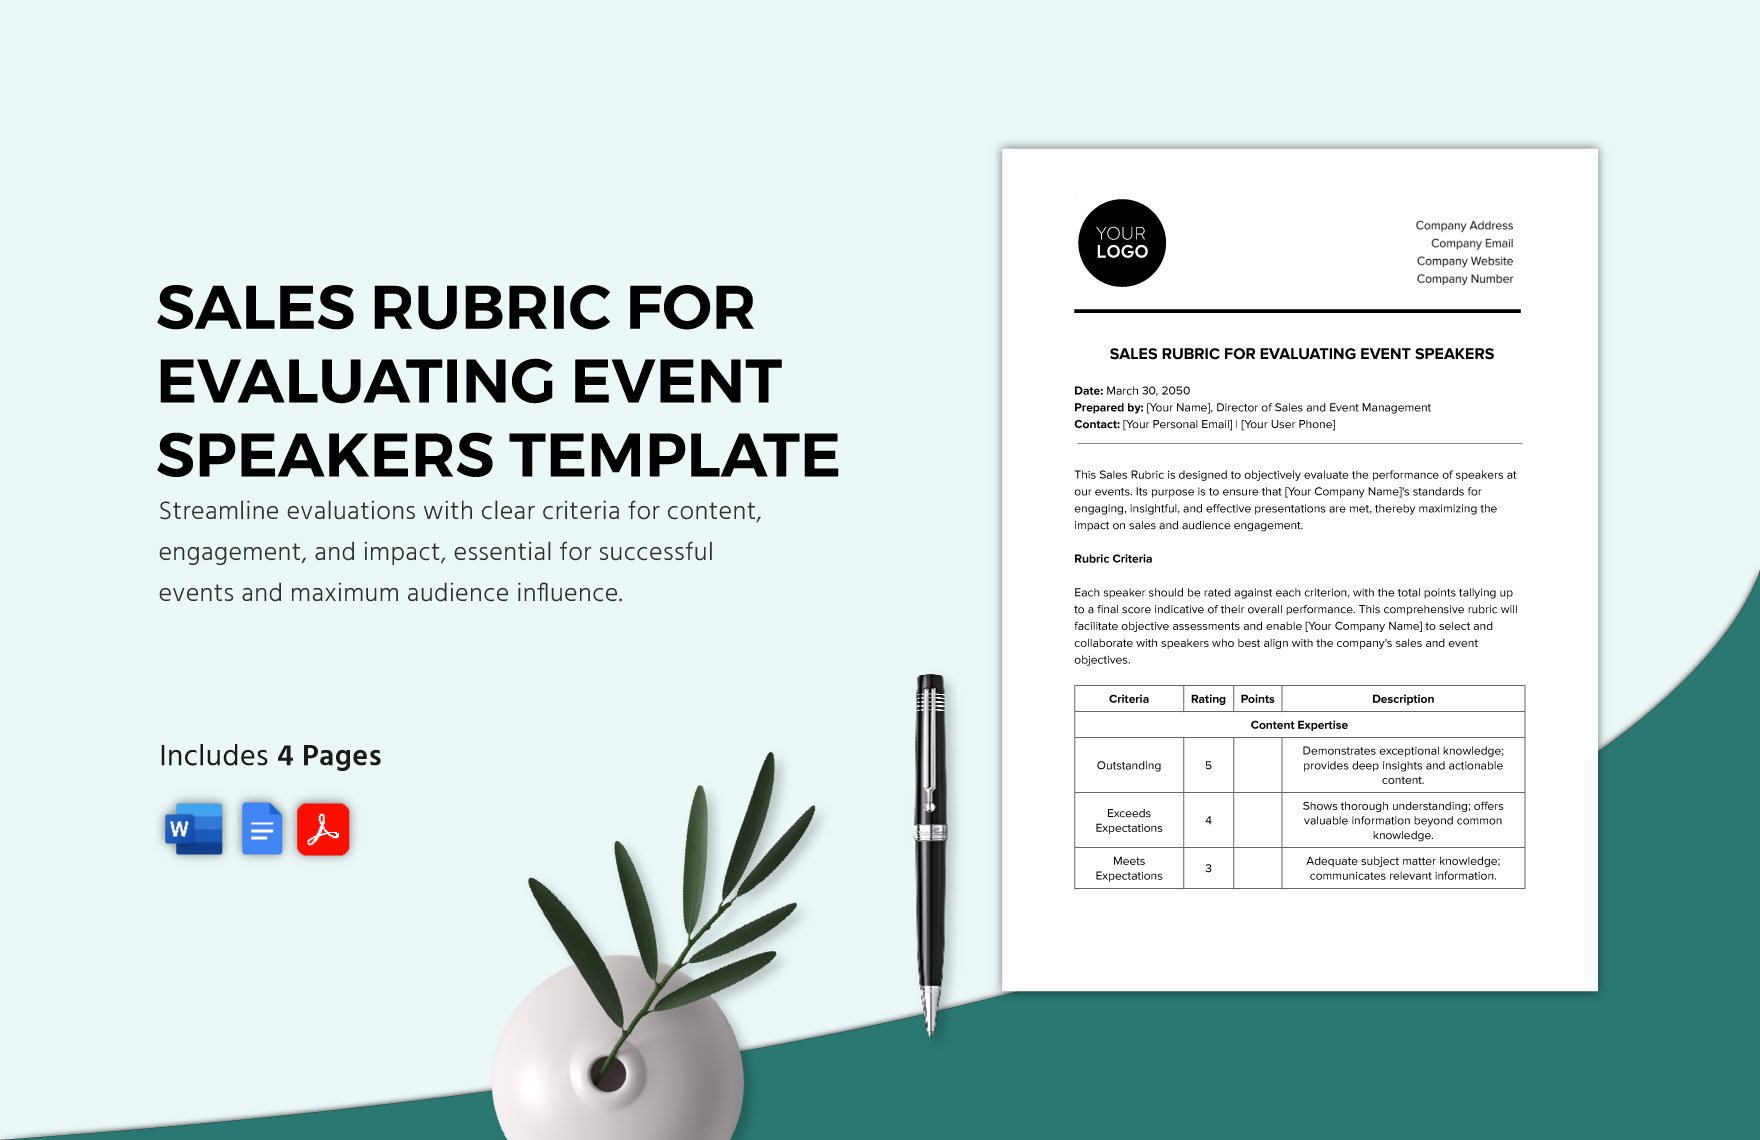 Sales Rubric for Evaluating Event Speakers Template